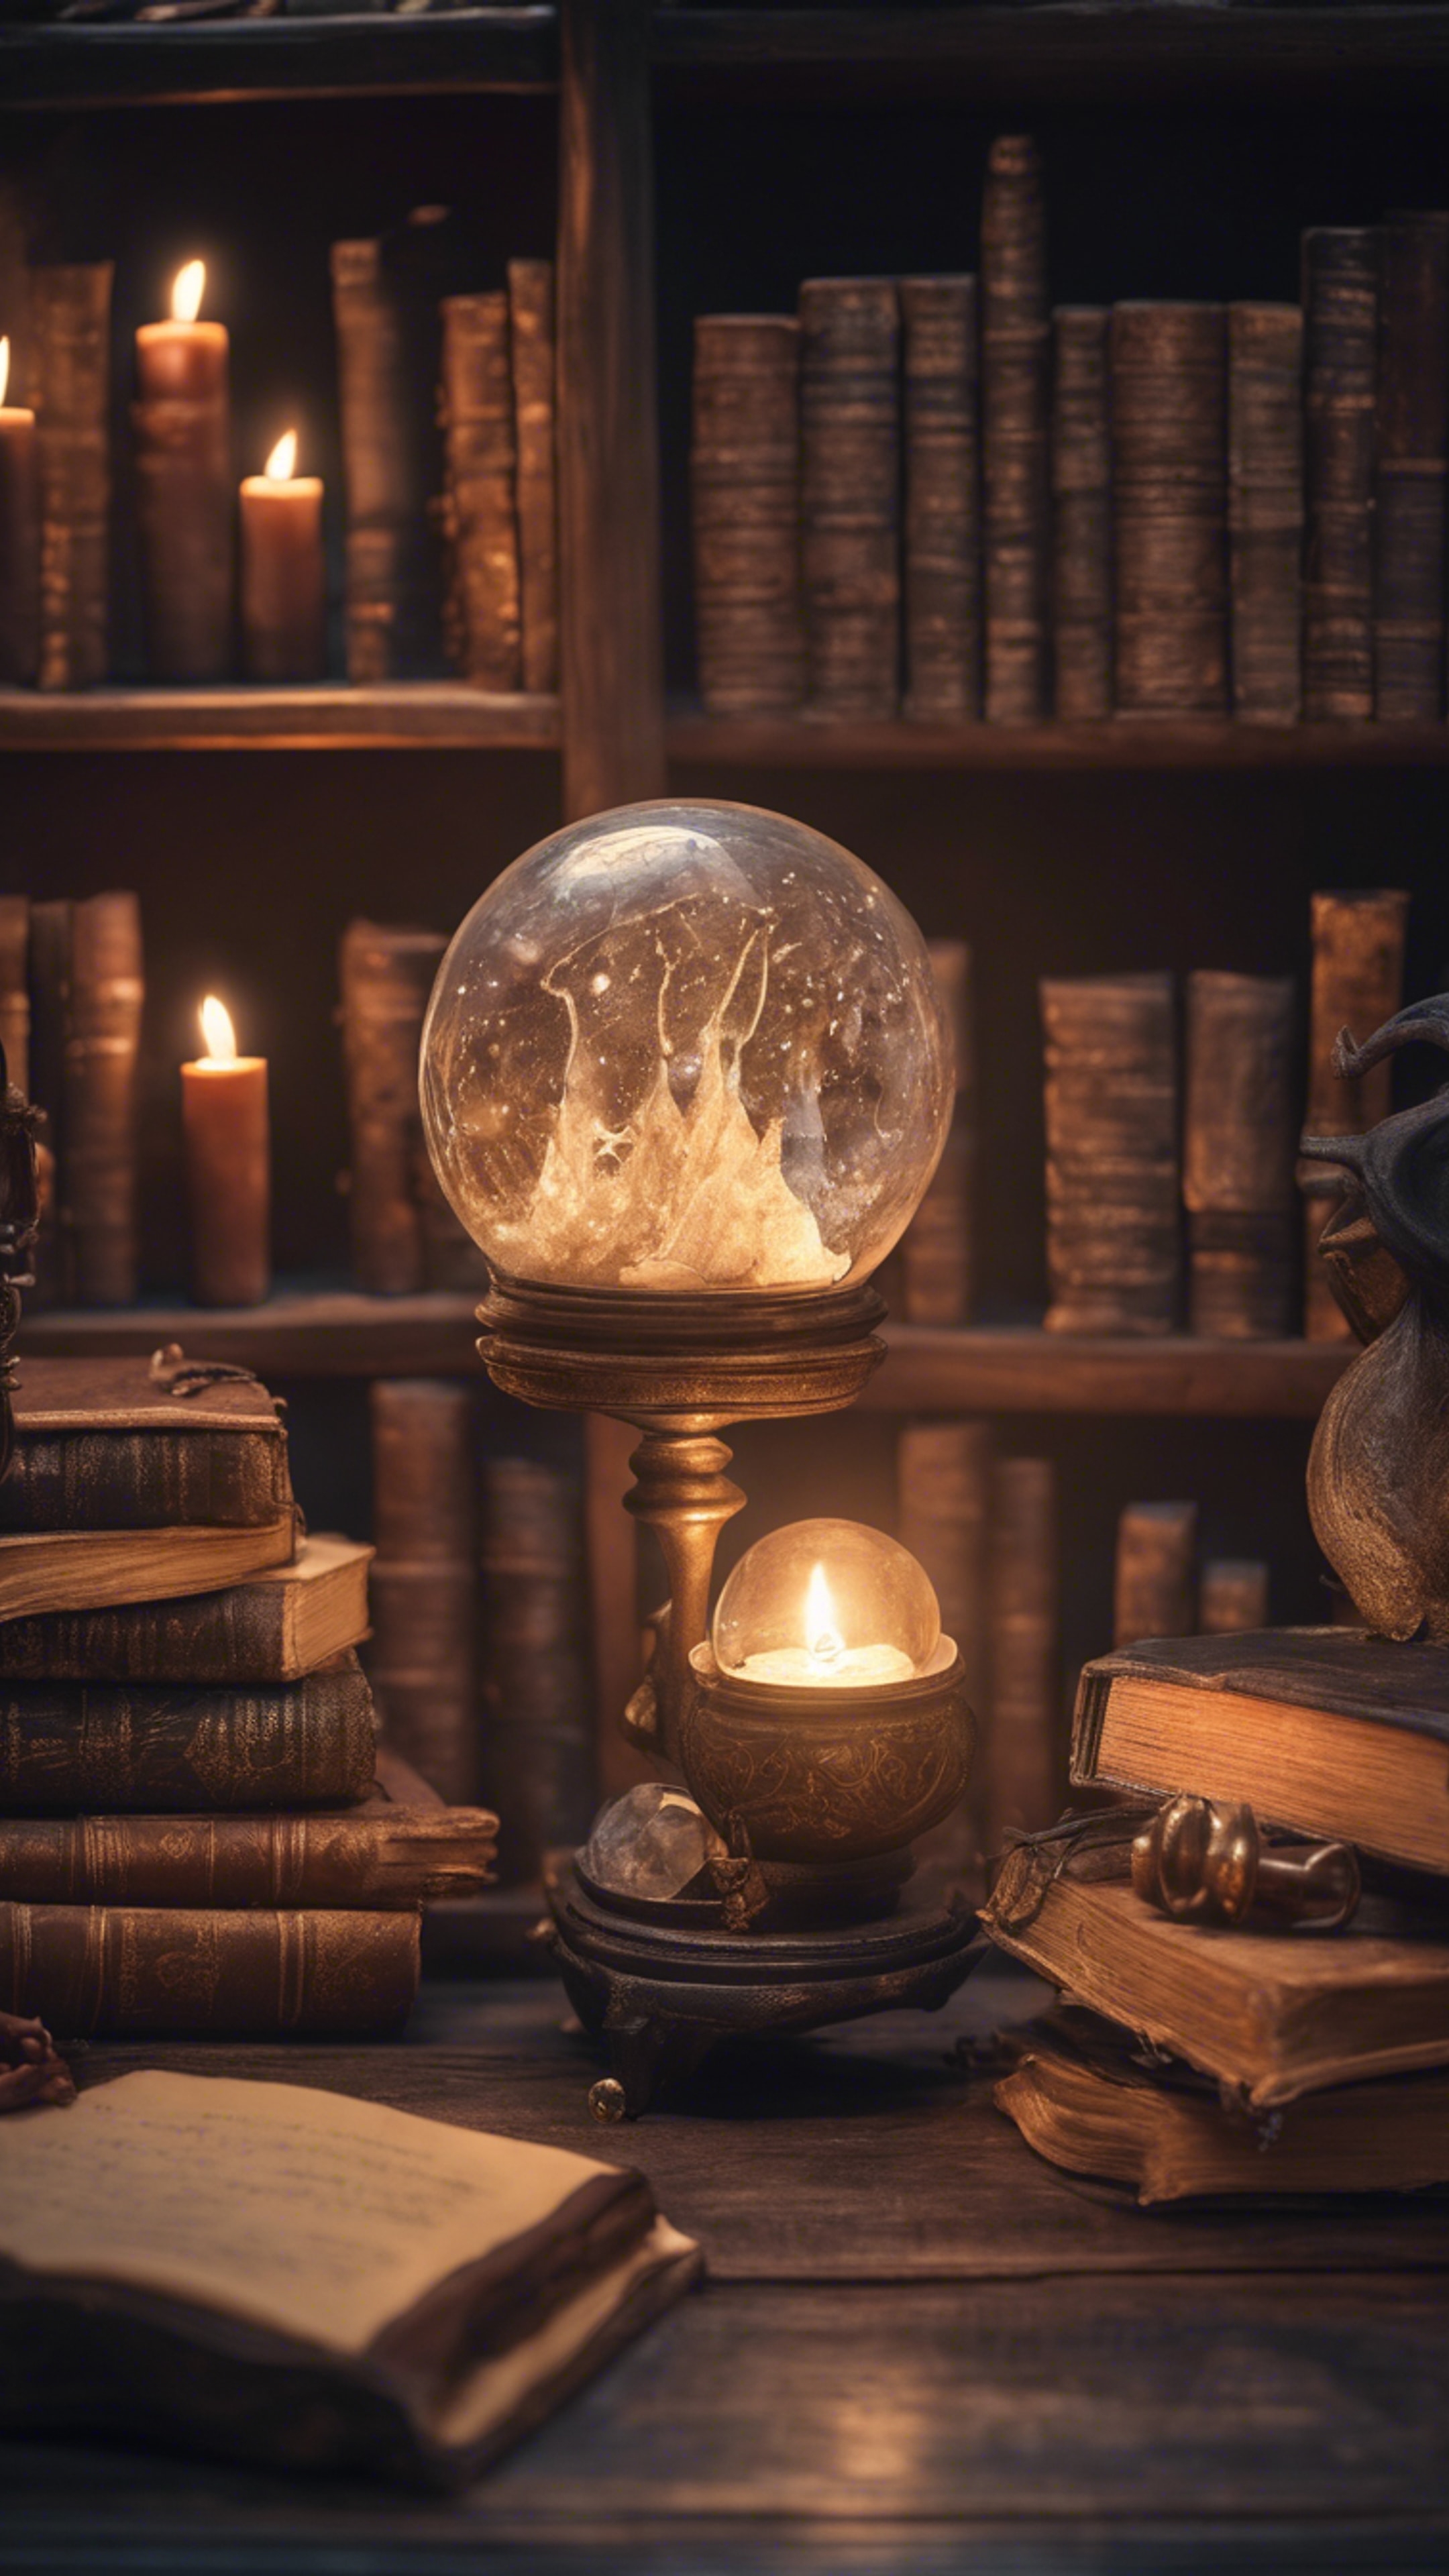 A cozy mystical scene with a wizard’s study room - magical artifacts, rows of spell books, a crystal ball, and a cauldron brewing a potion. 墙纸[df00e949c5584759a81e]